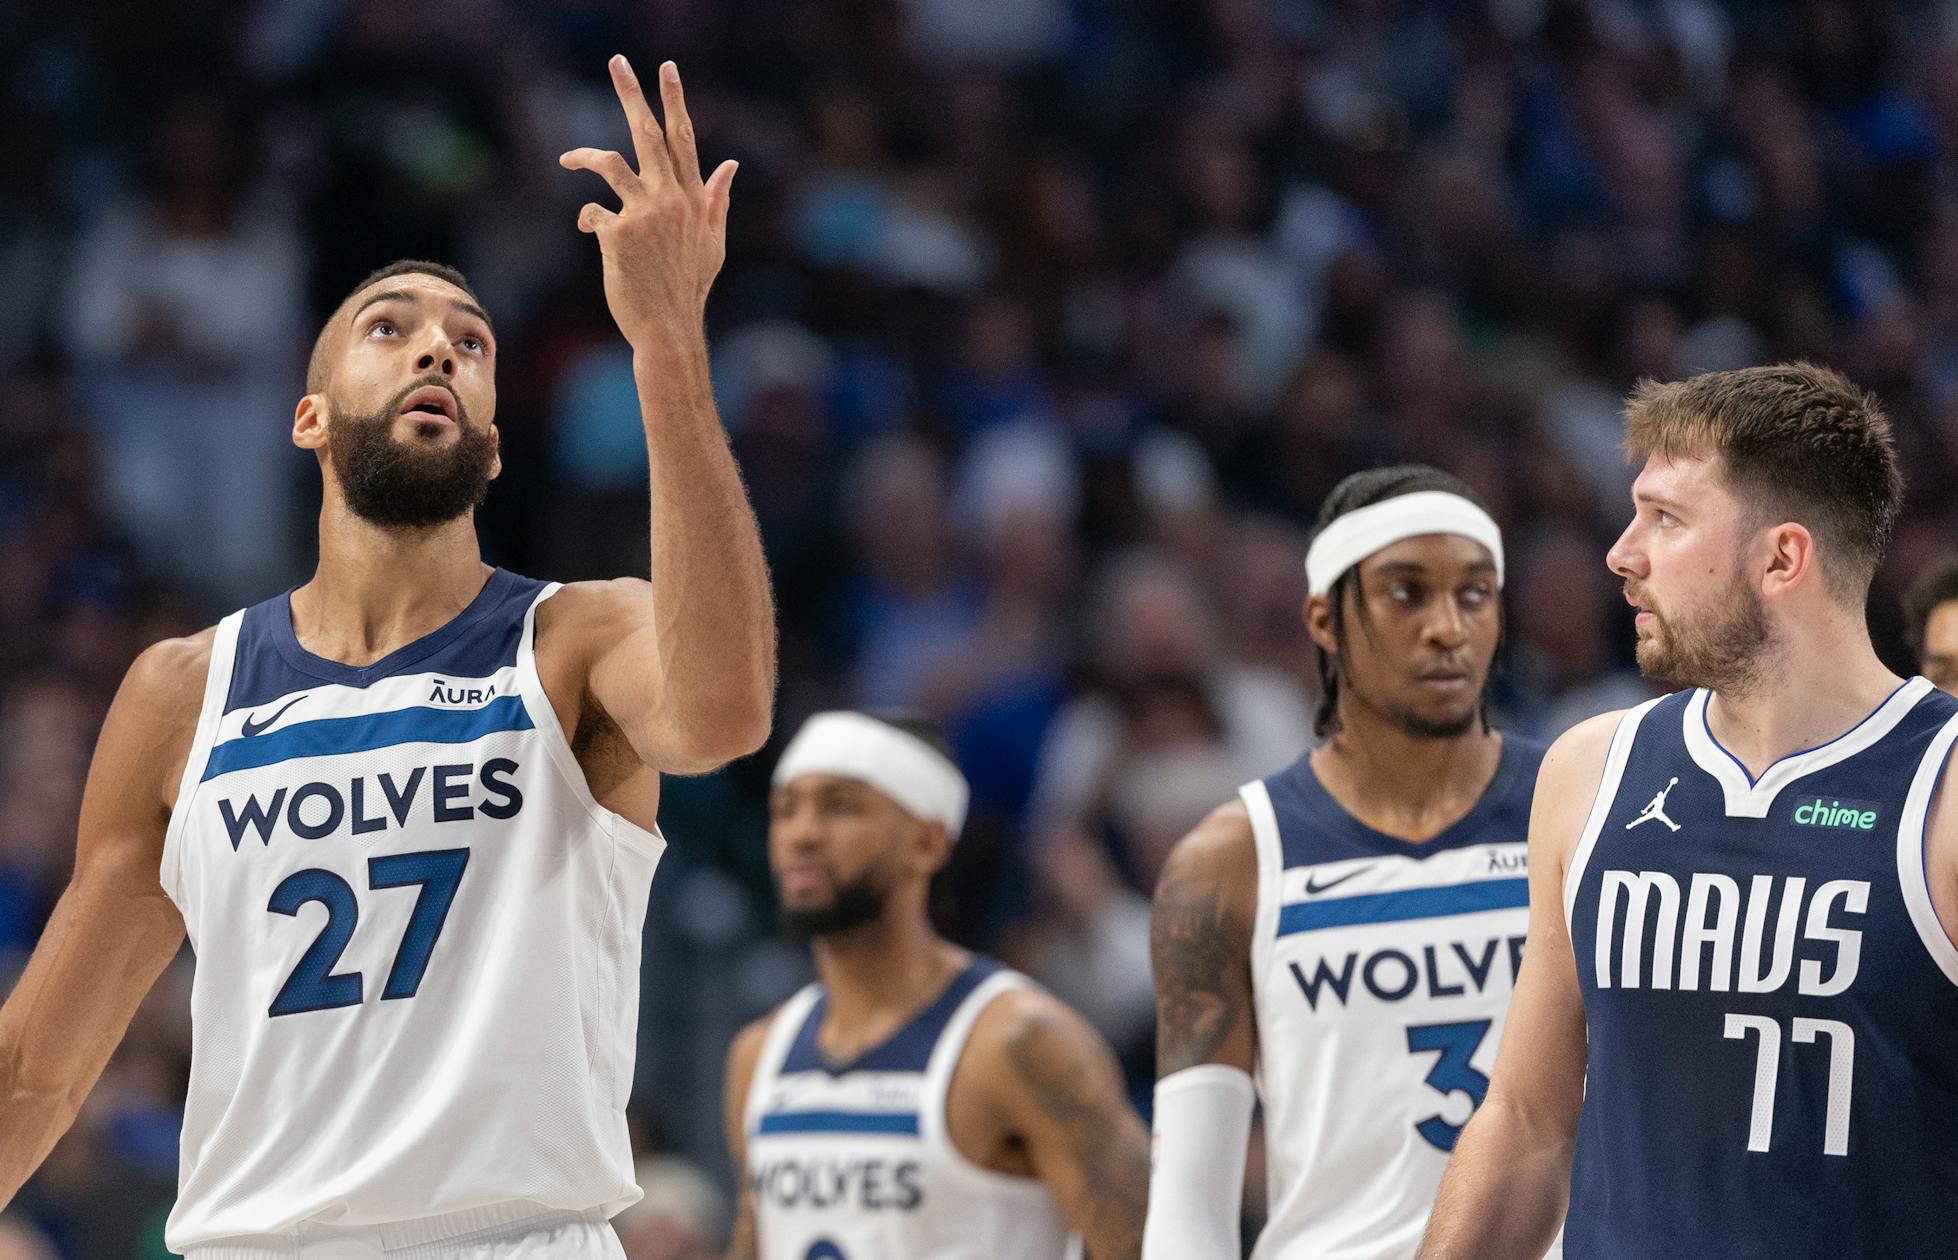 The Unfavorable Odds Faced by the Timberwolves, as Discussed by Patrick Reusse and Michael Rand